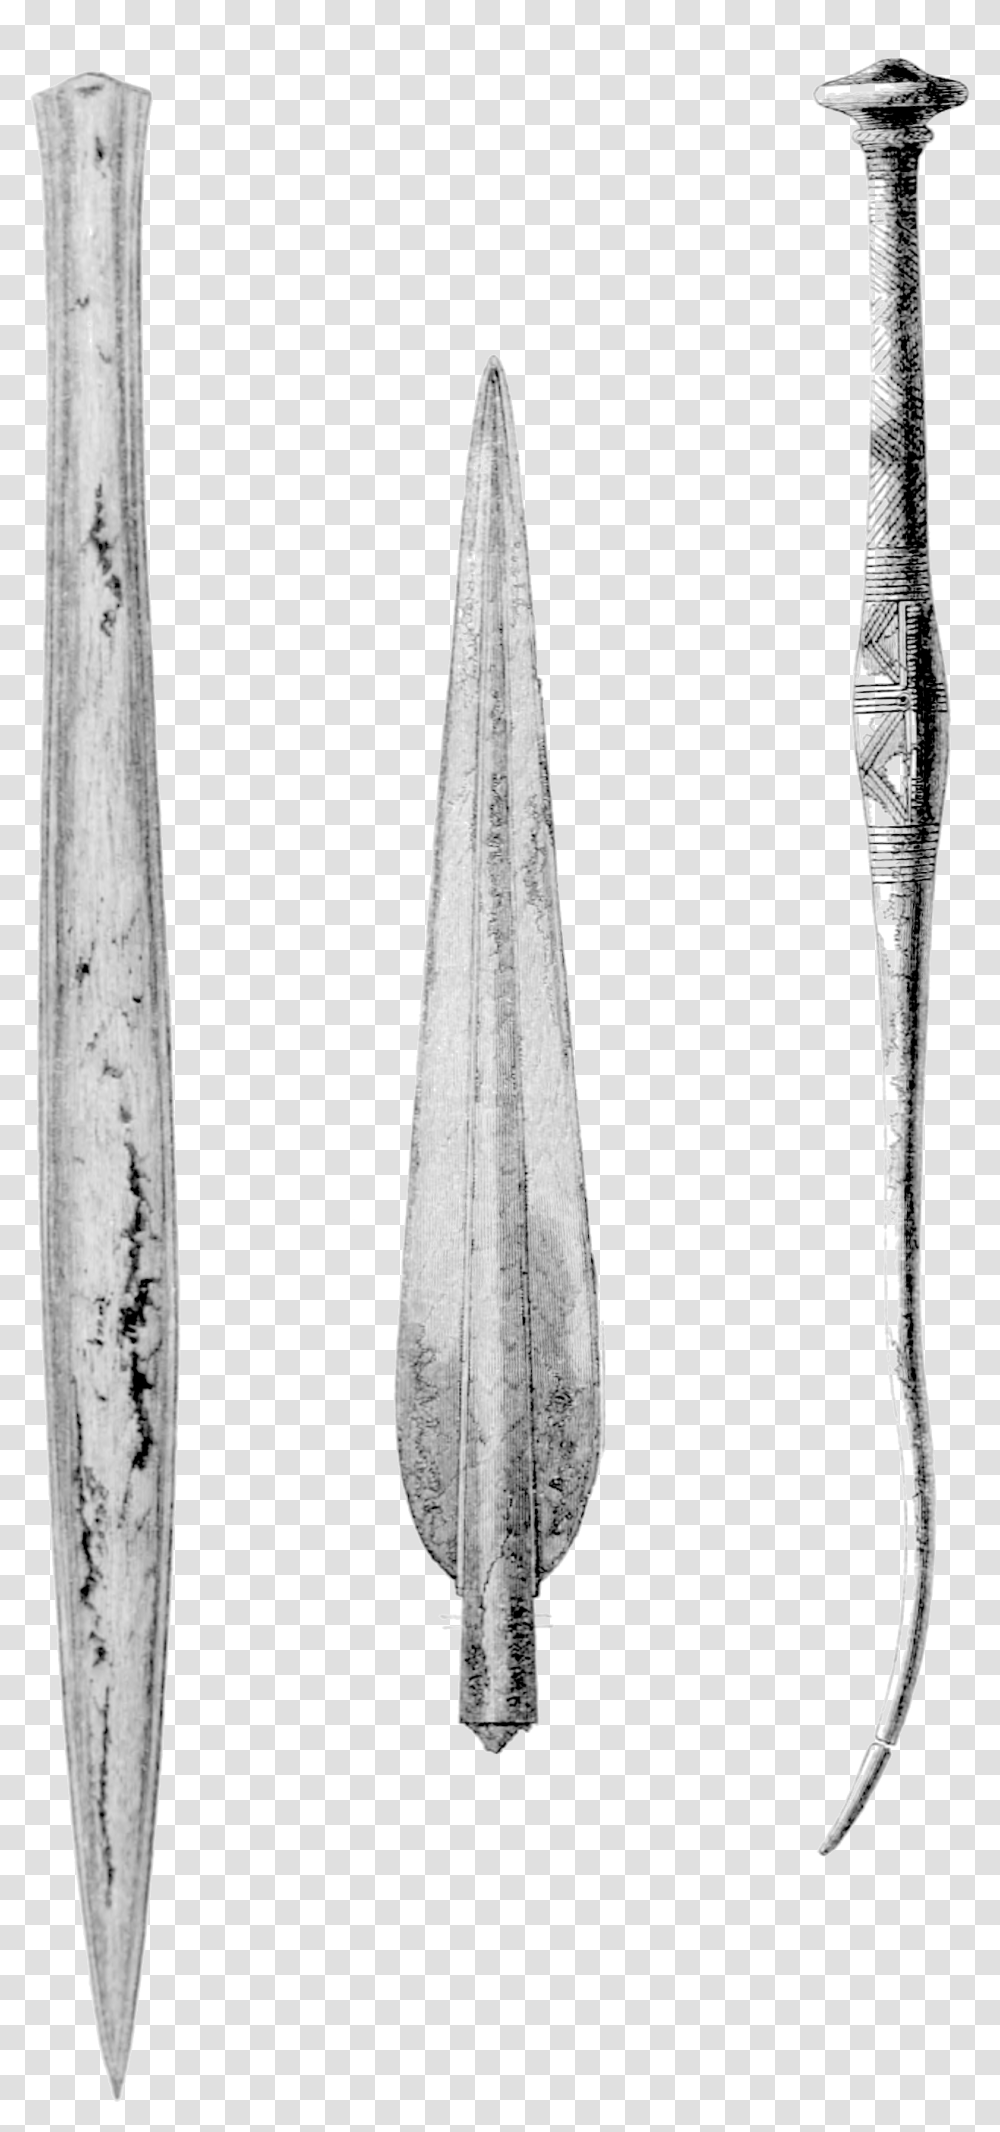 Archaeological Journal Volume 9 0020 Knife, Oars, Arrow, Cutlery Transparent Png